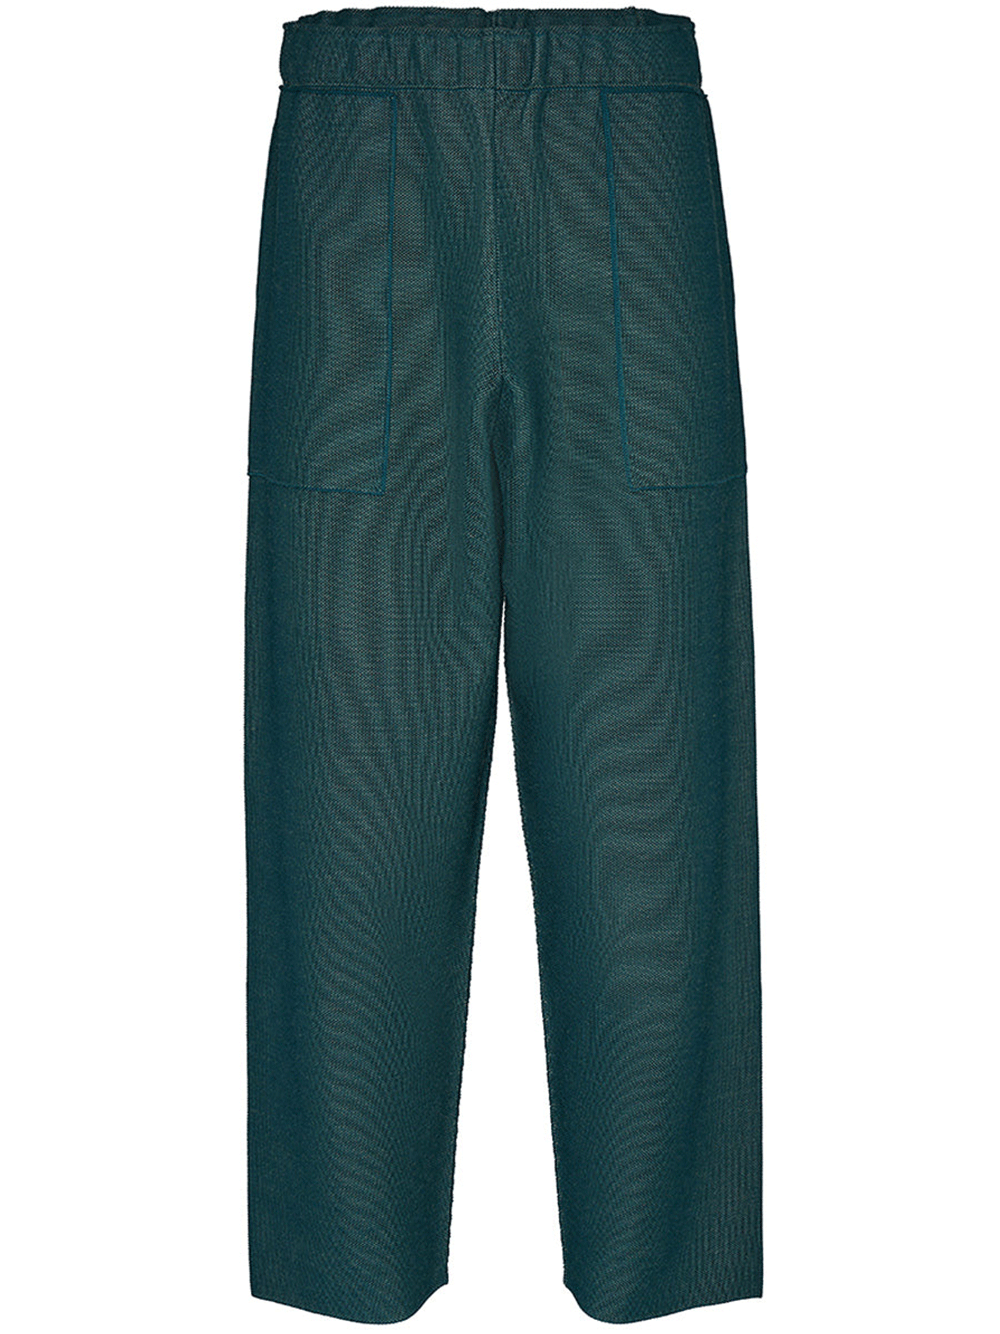 Homme-Plisse-Issey-Miyake-Inlaid-Knit-Top-Green-1